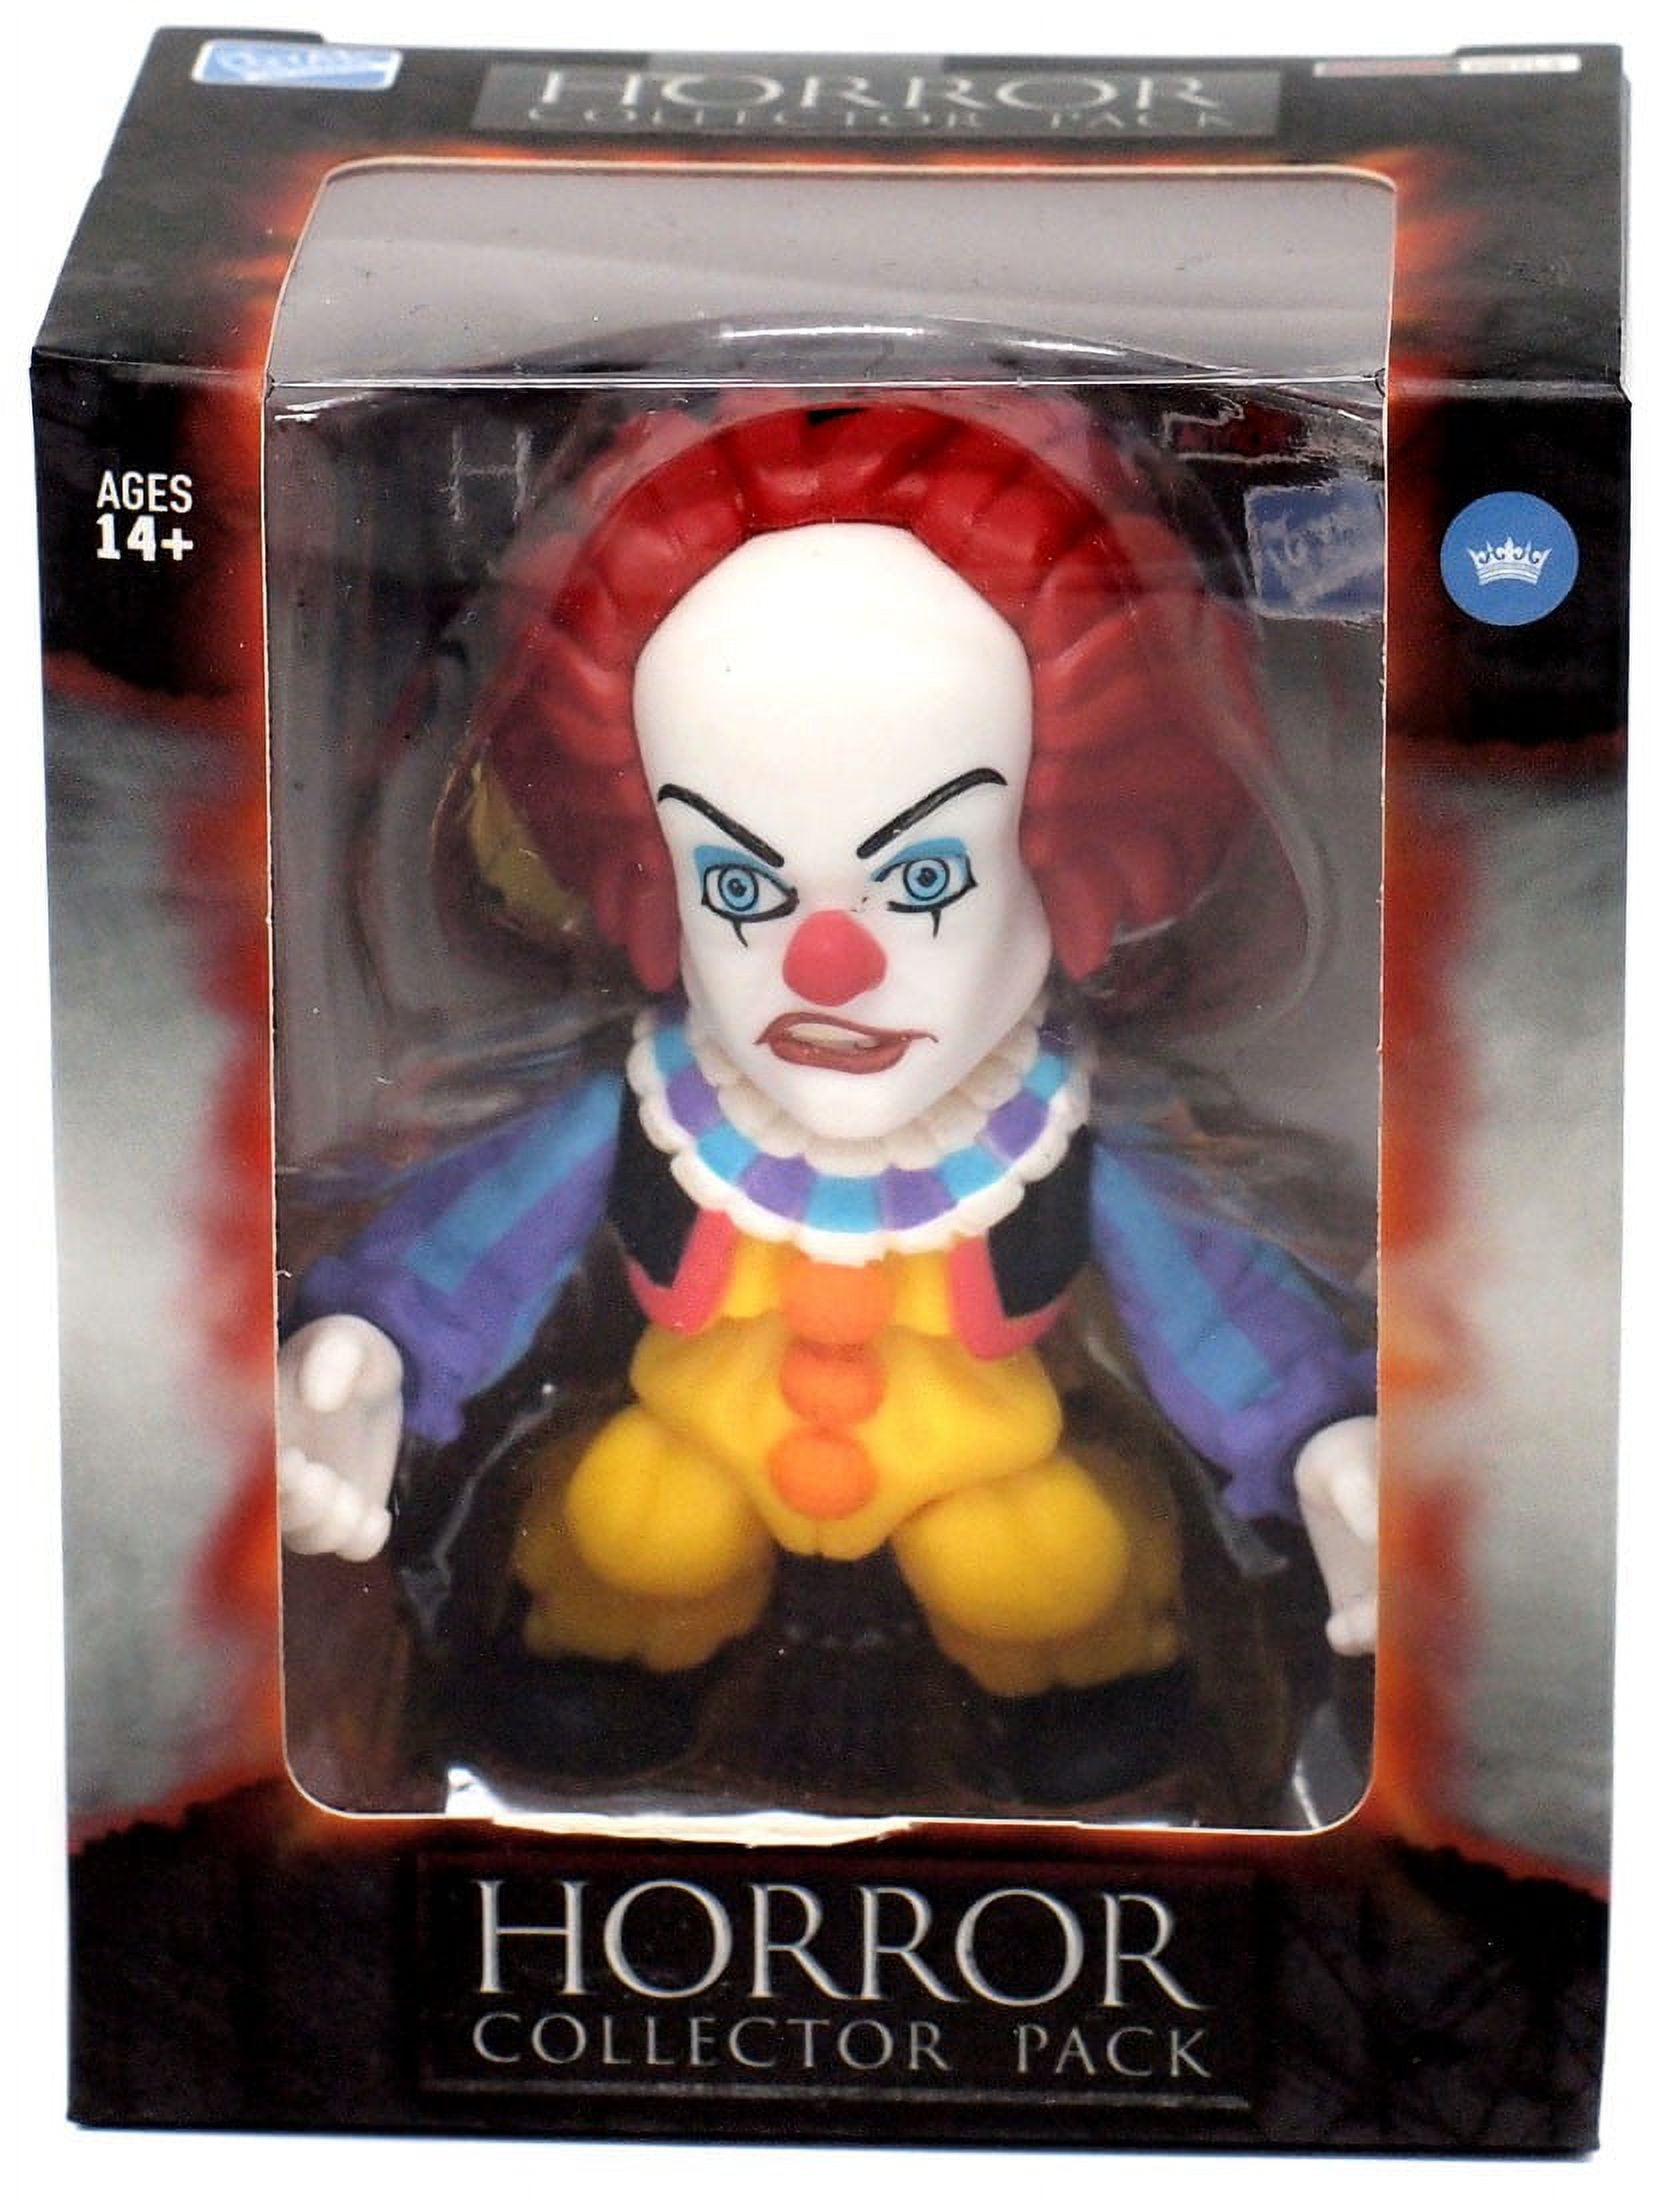 Clown Figurines For Saleneca Pennywise Horror Action Figure - Collectible  Clown Model For 14+